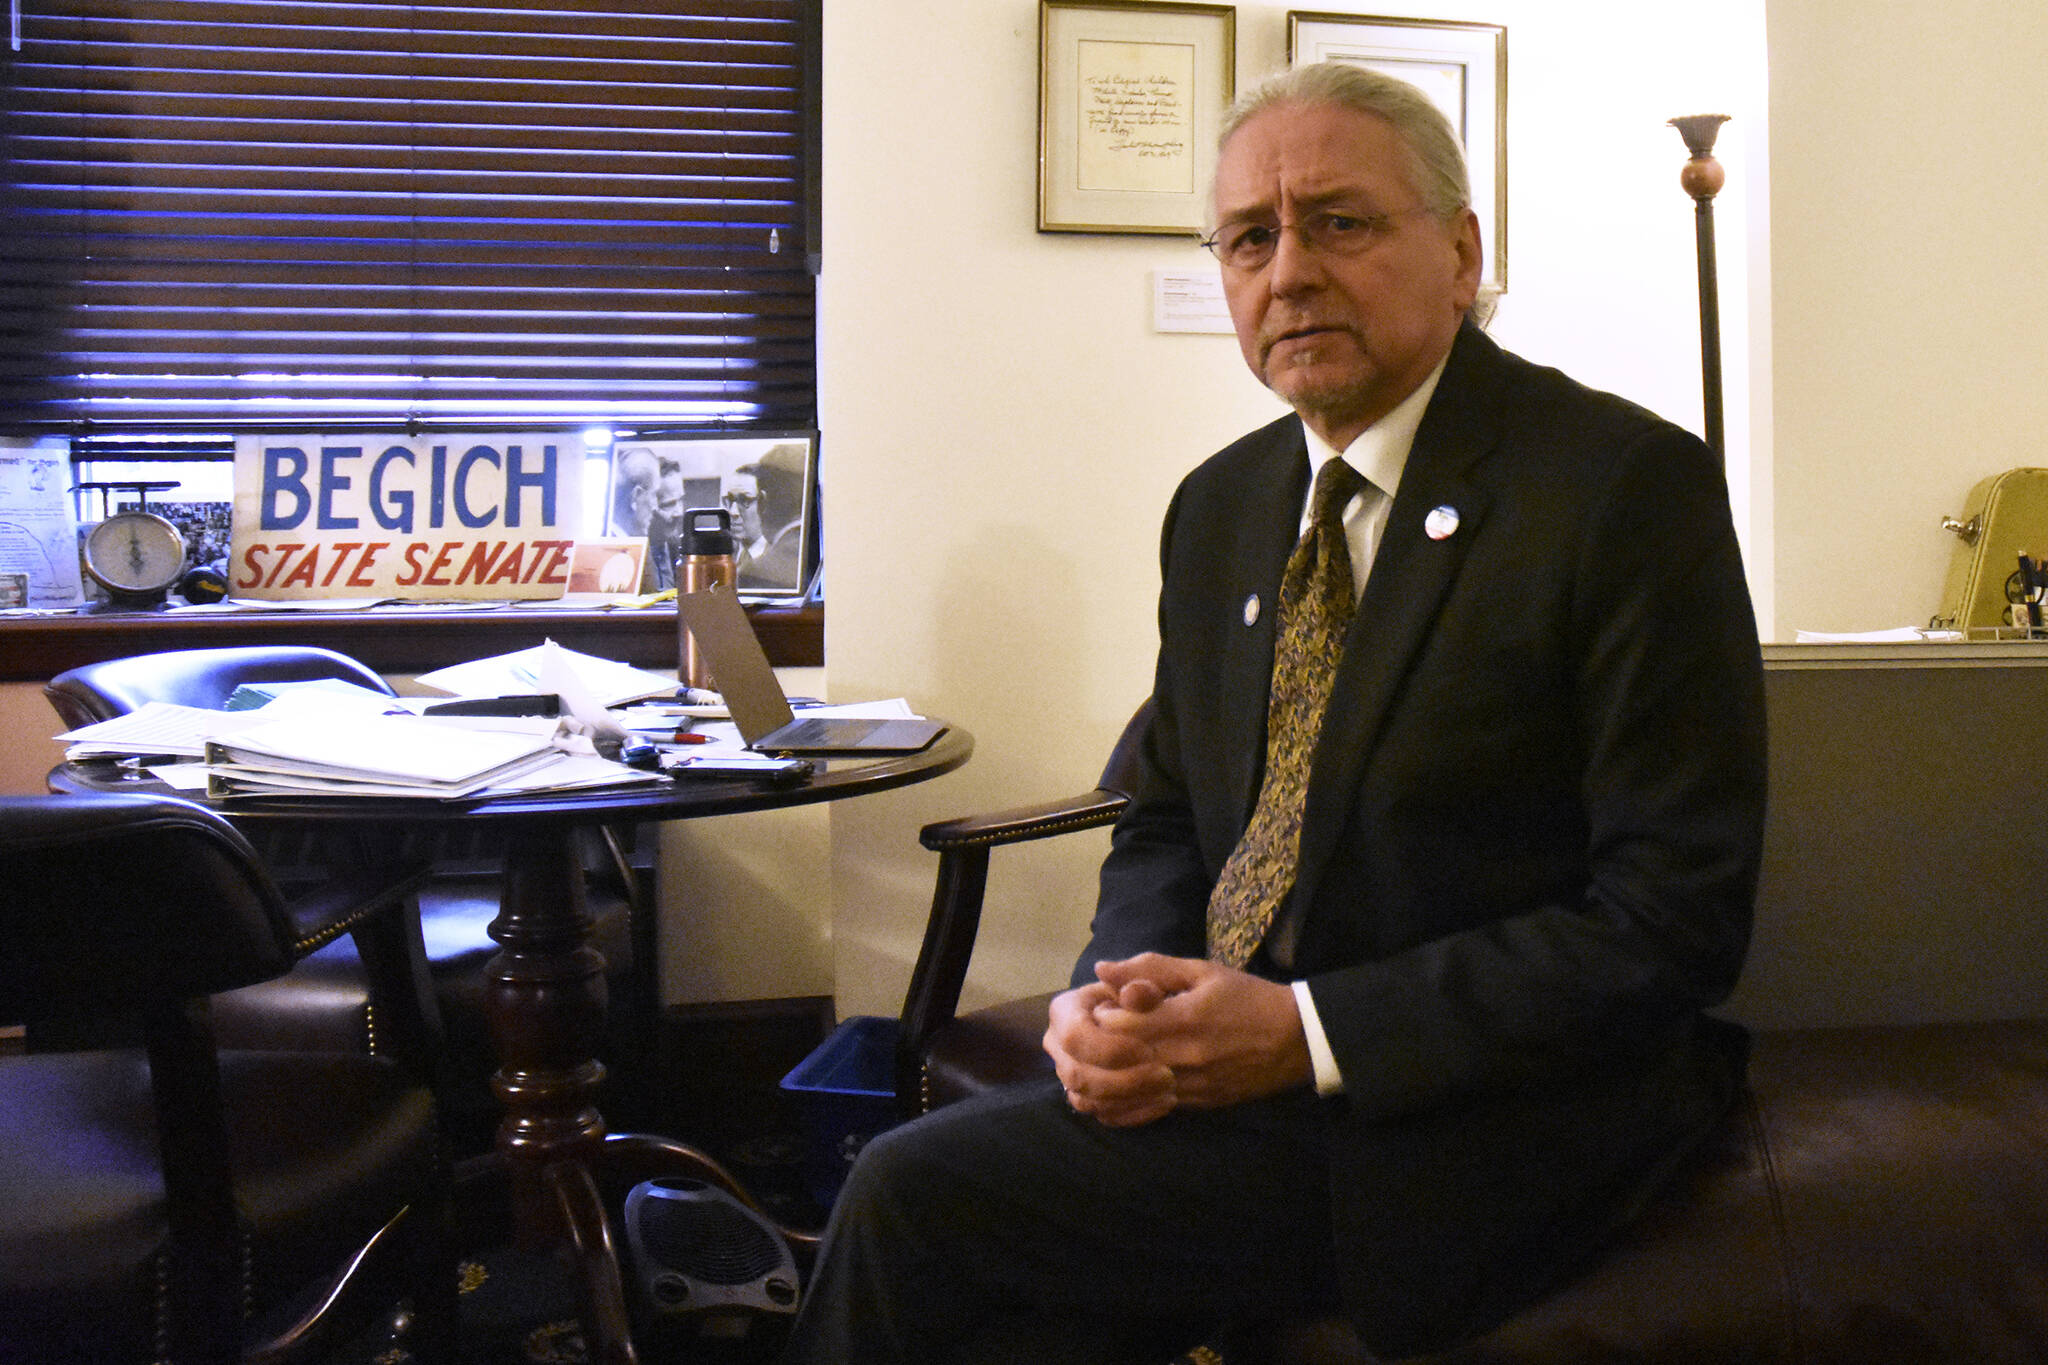 Peter Segall / Juneau Empire 
Sen. Tom Begich, D-Anchorage, spoke with the Empire in his office at the Alaska State Capitol on Tuesday, April 12, 2022, after the Alaska State Senate passed the Alaska Reads Act, a bill he originially introduced with Gov. Mike Dunleavy in 2020.